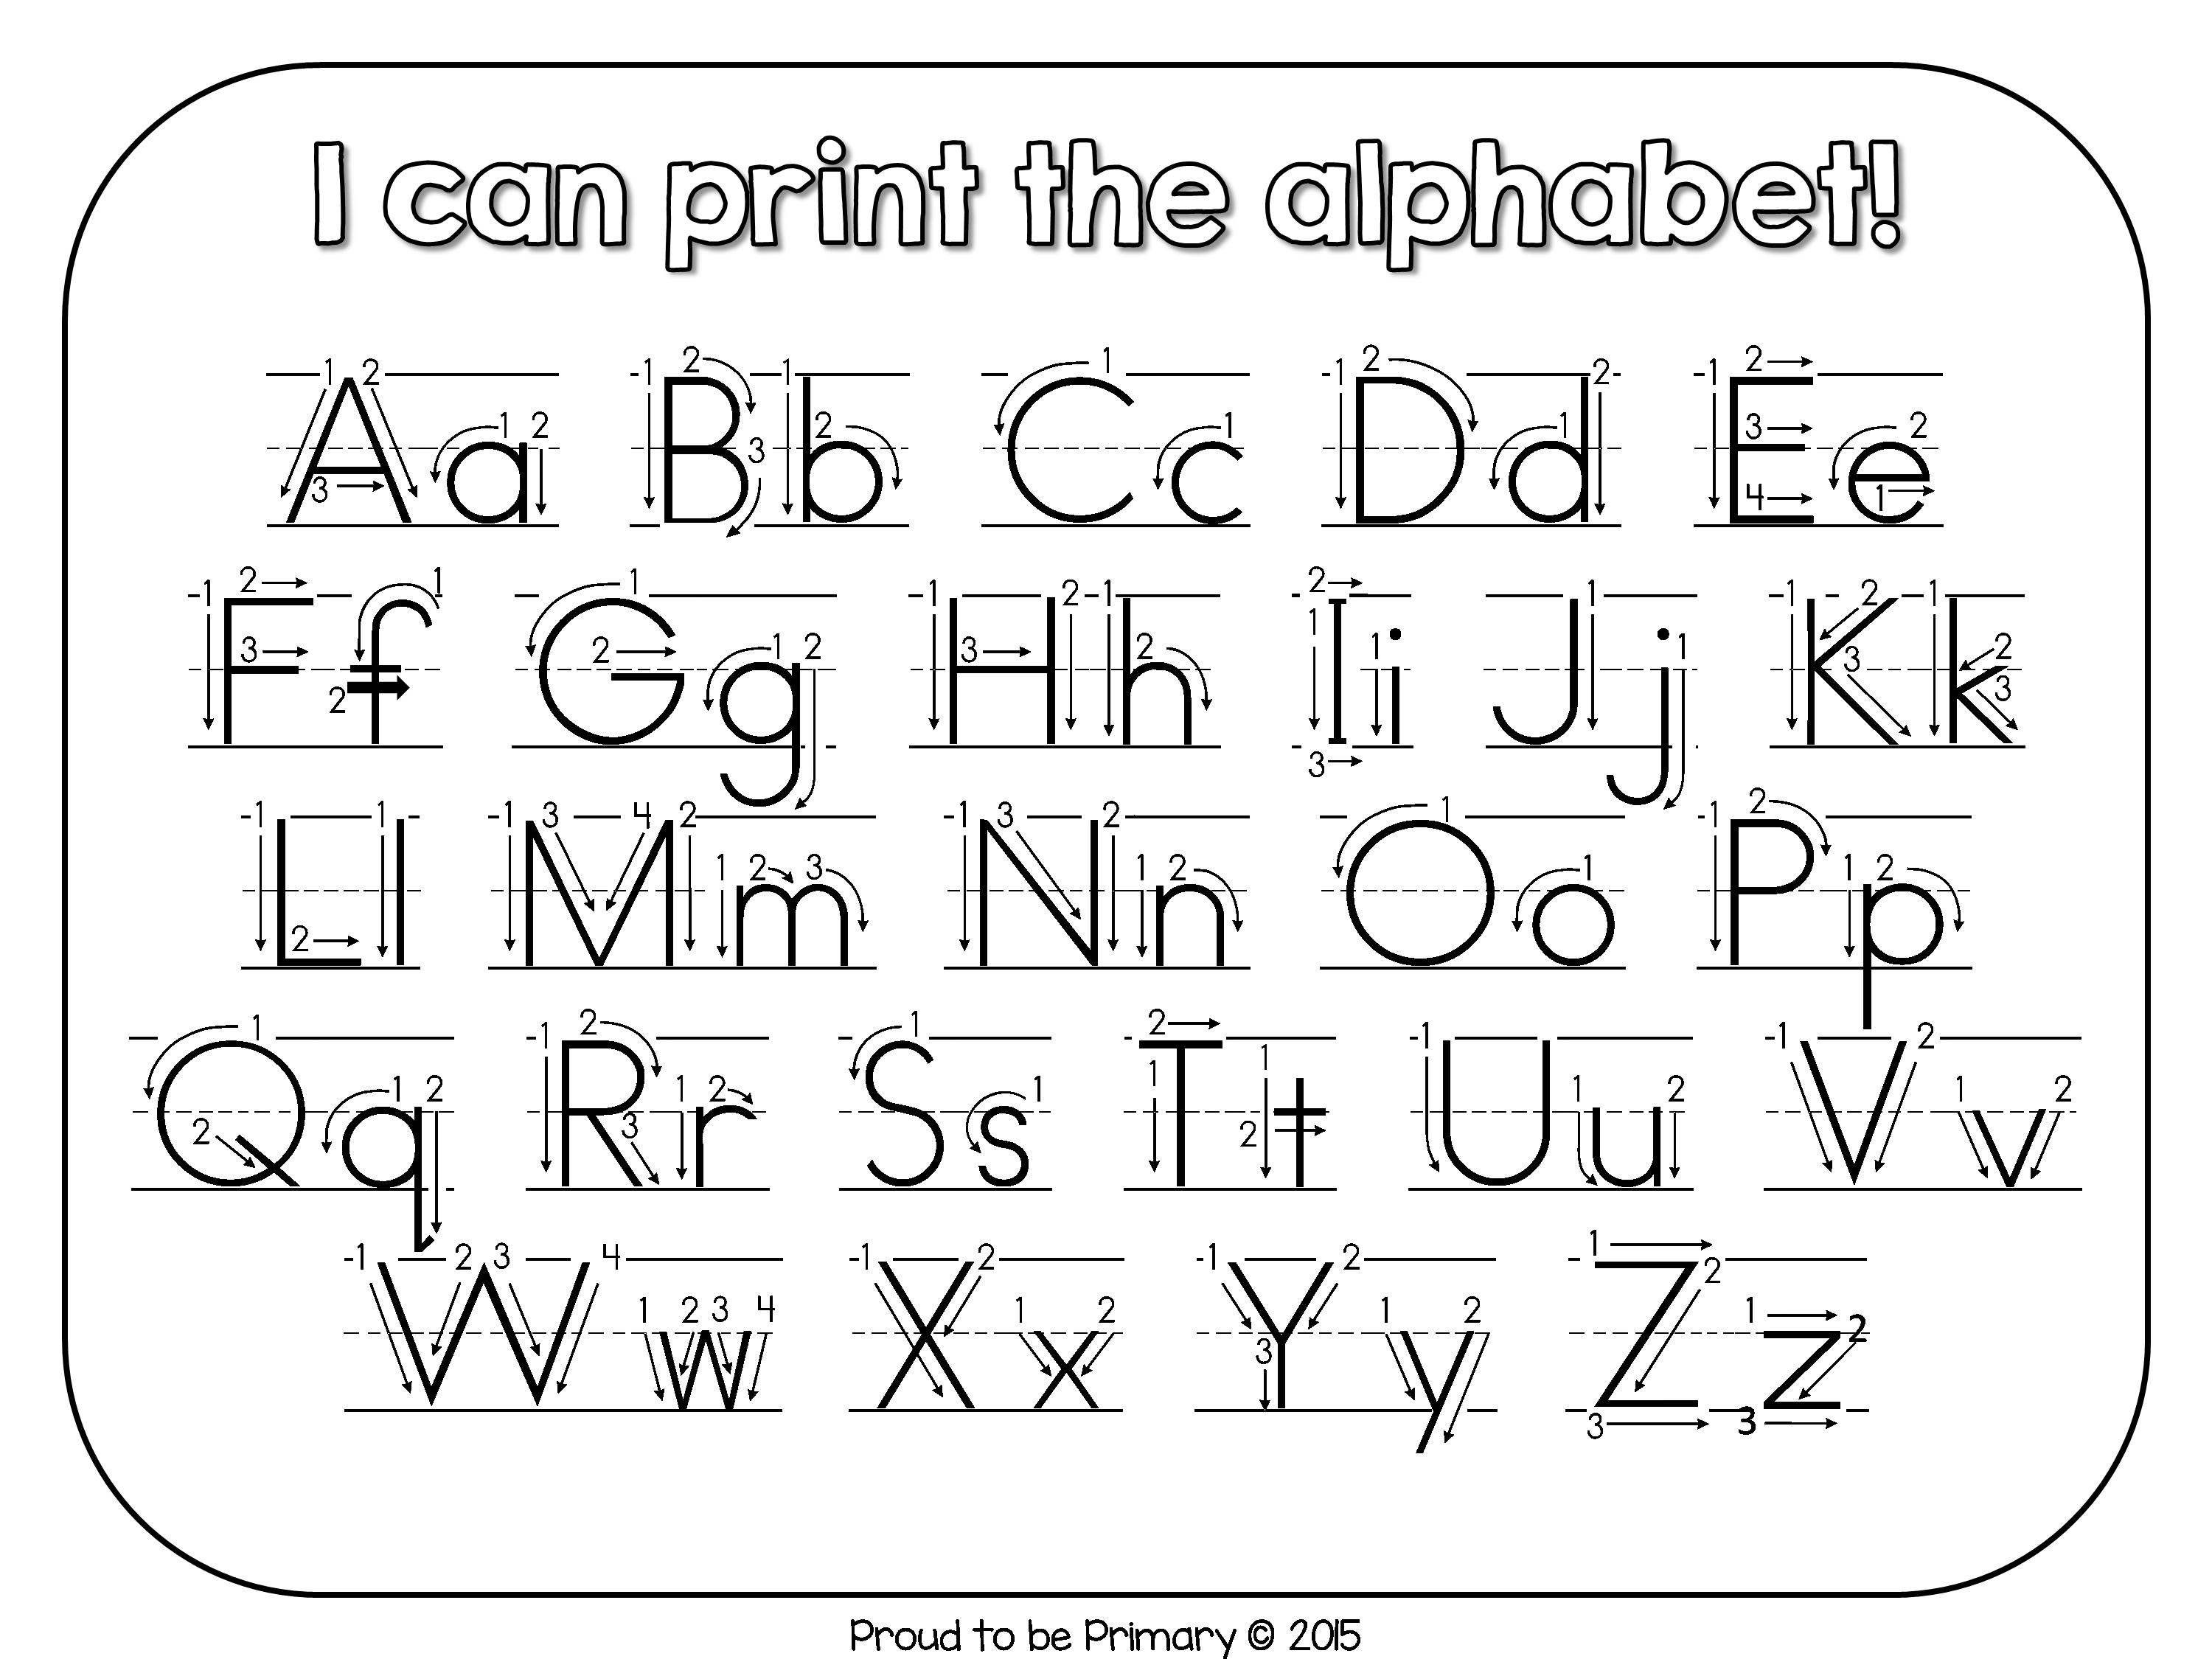 Alphabet Handwriting Posters - Proud to be Primary